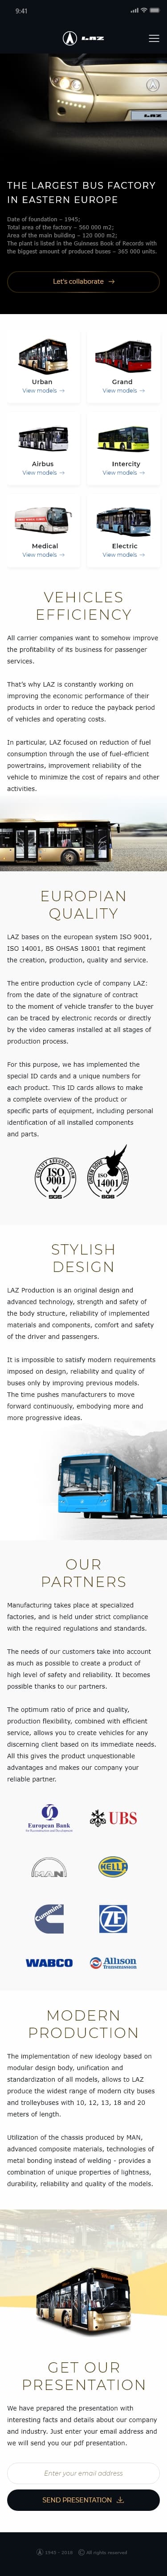 mobile version of home page for laz factory designed by Dima Radushev